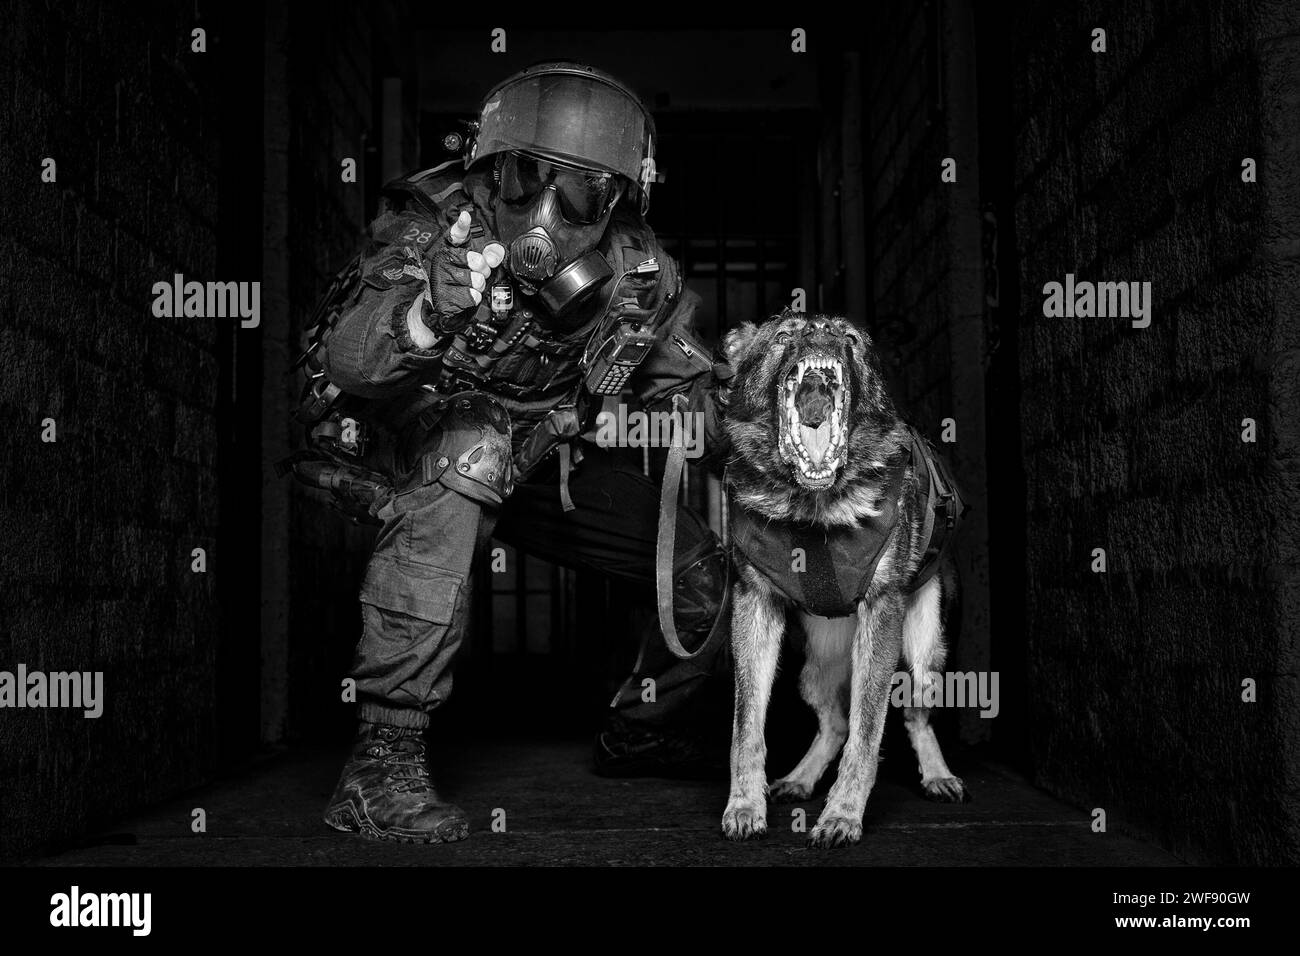 UK Prison service tornado team dog and handler in riot gear, german shepherd dog snarling and barking aggressively, both are focused on the camera Stock Photo